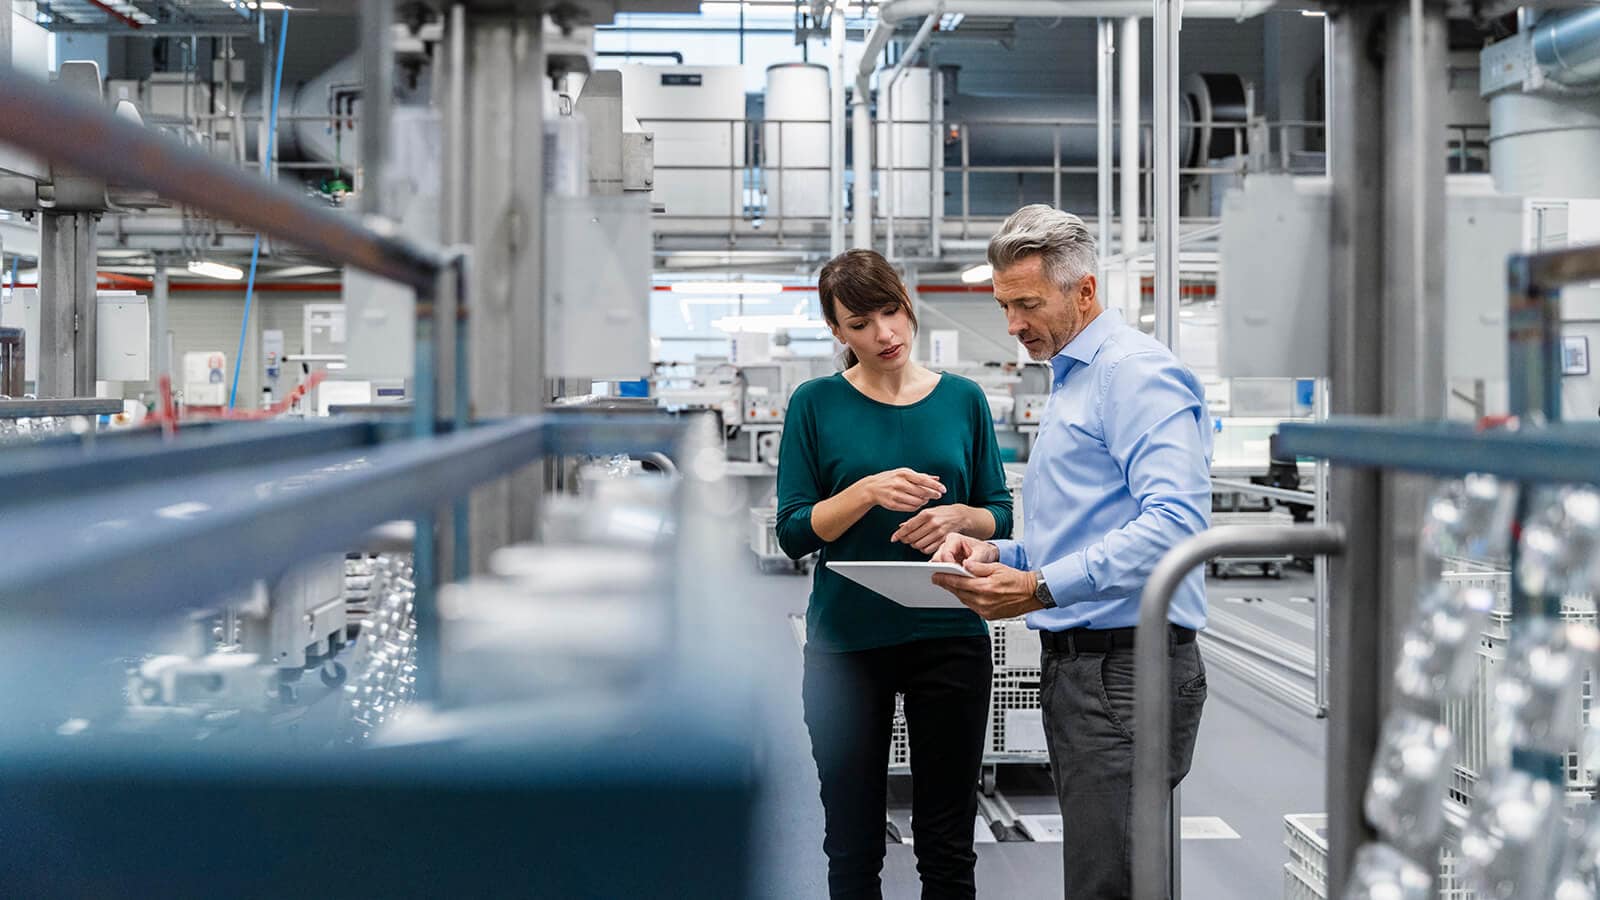 Businesswoman discussing over tablet PC with coworker at factory